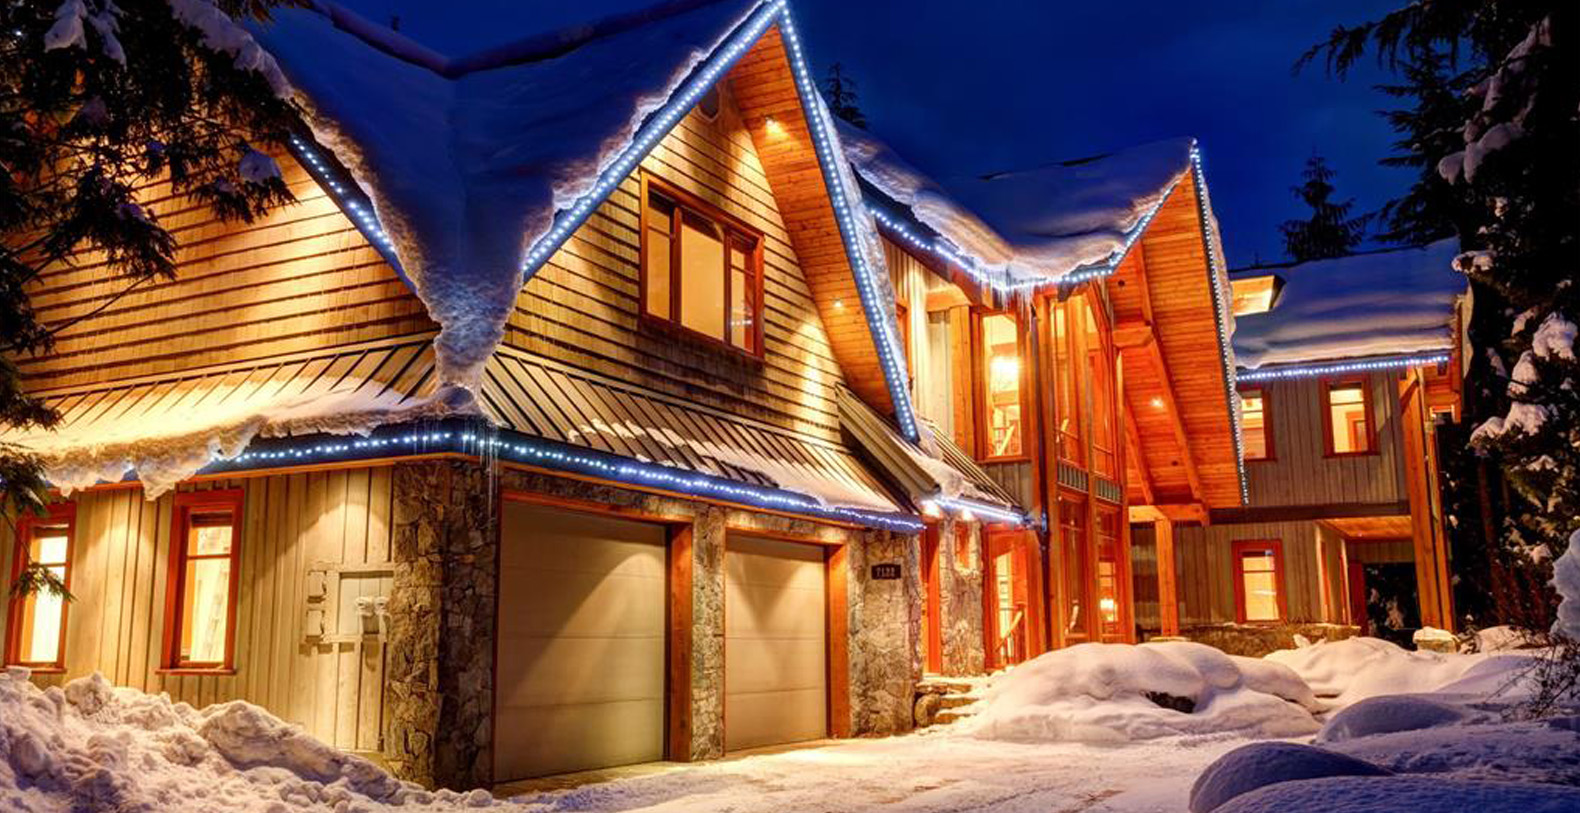 Timber Luxury Chalet Whistler, British Columbia, Canada, Vacation Rentals